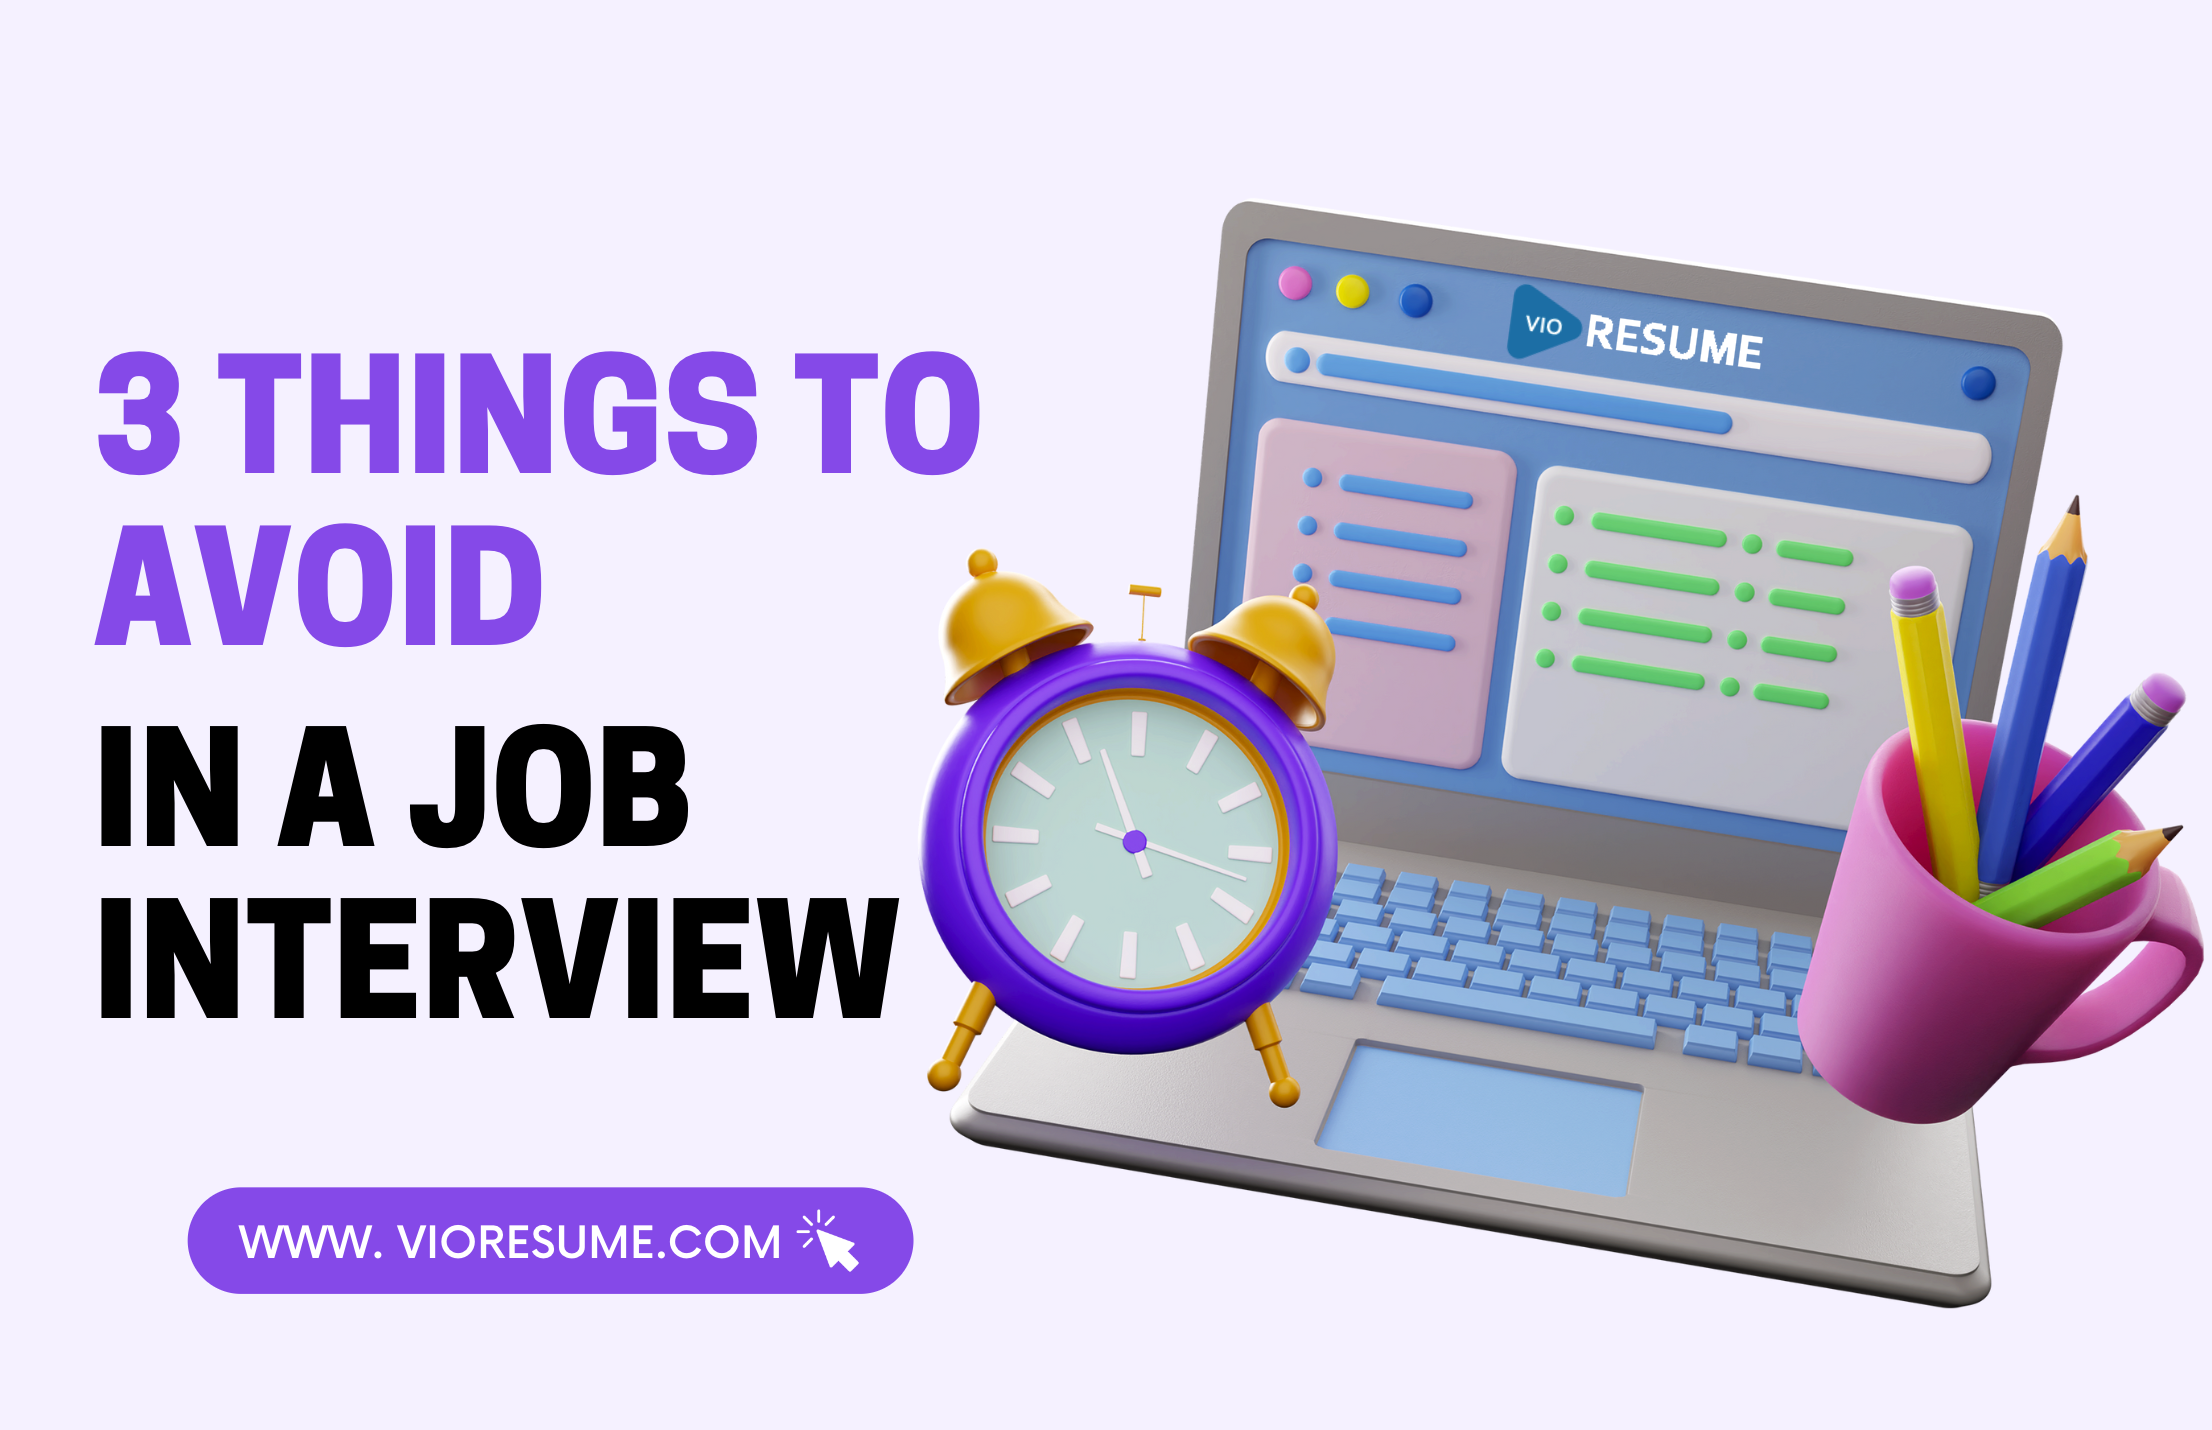 3 Things to avoid in a job interview